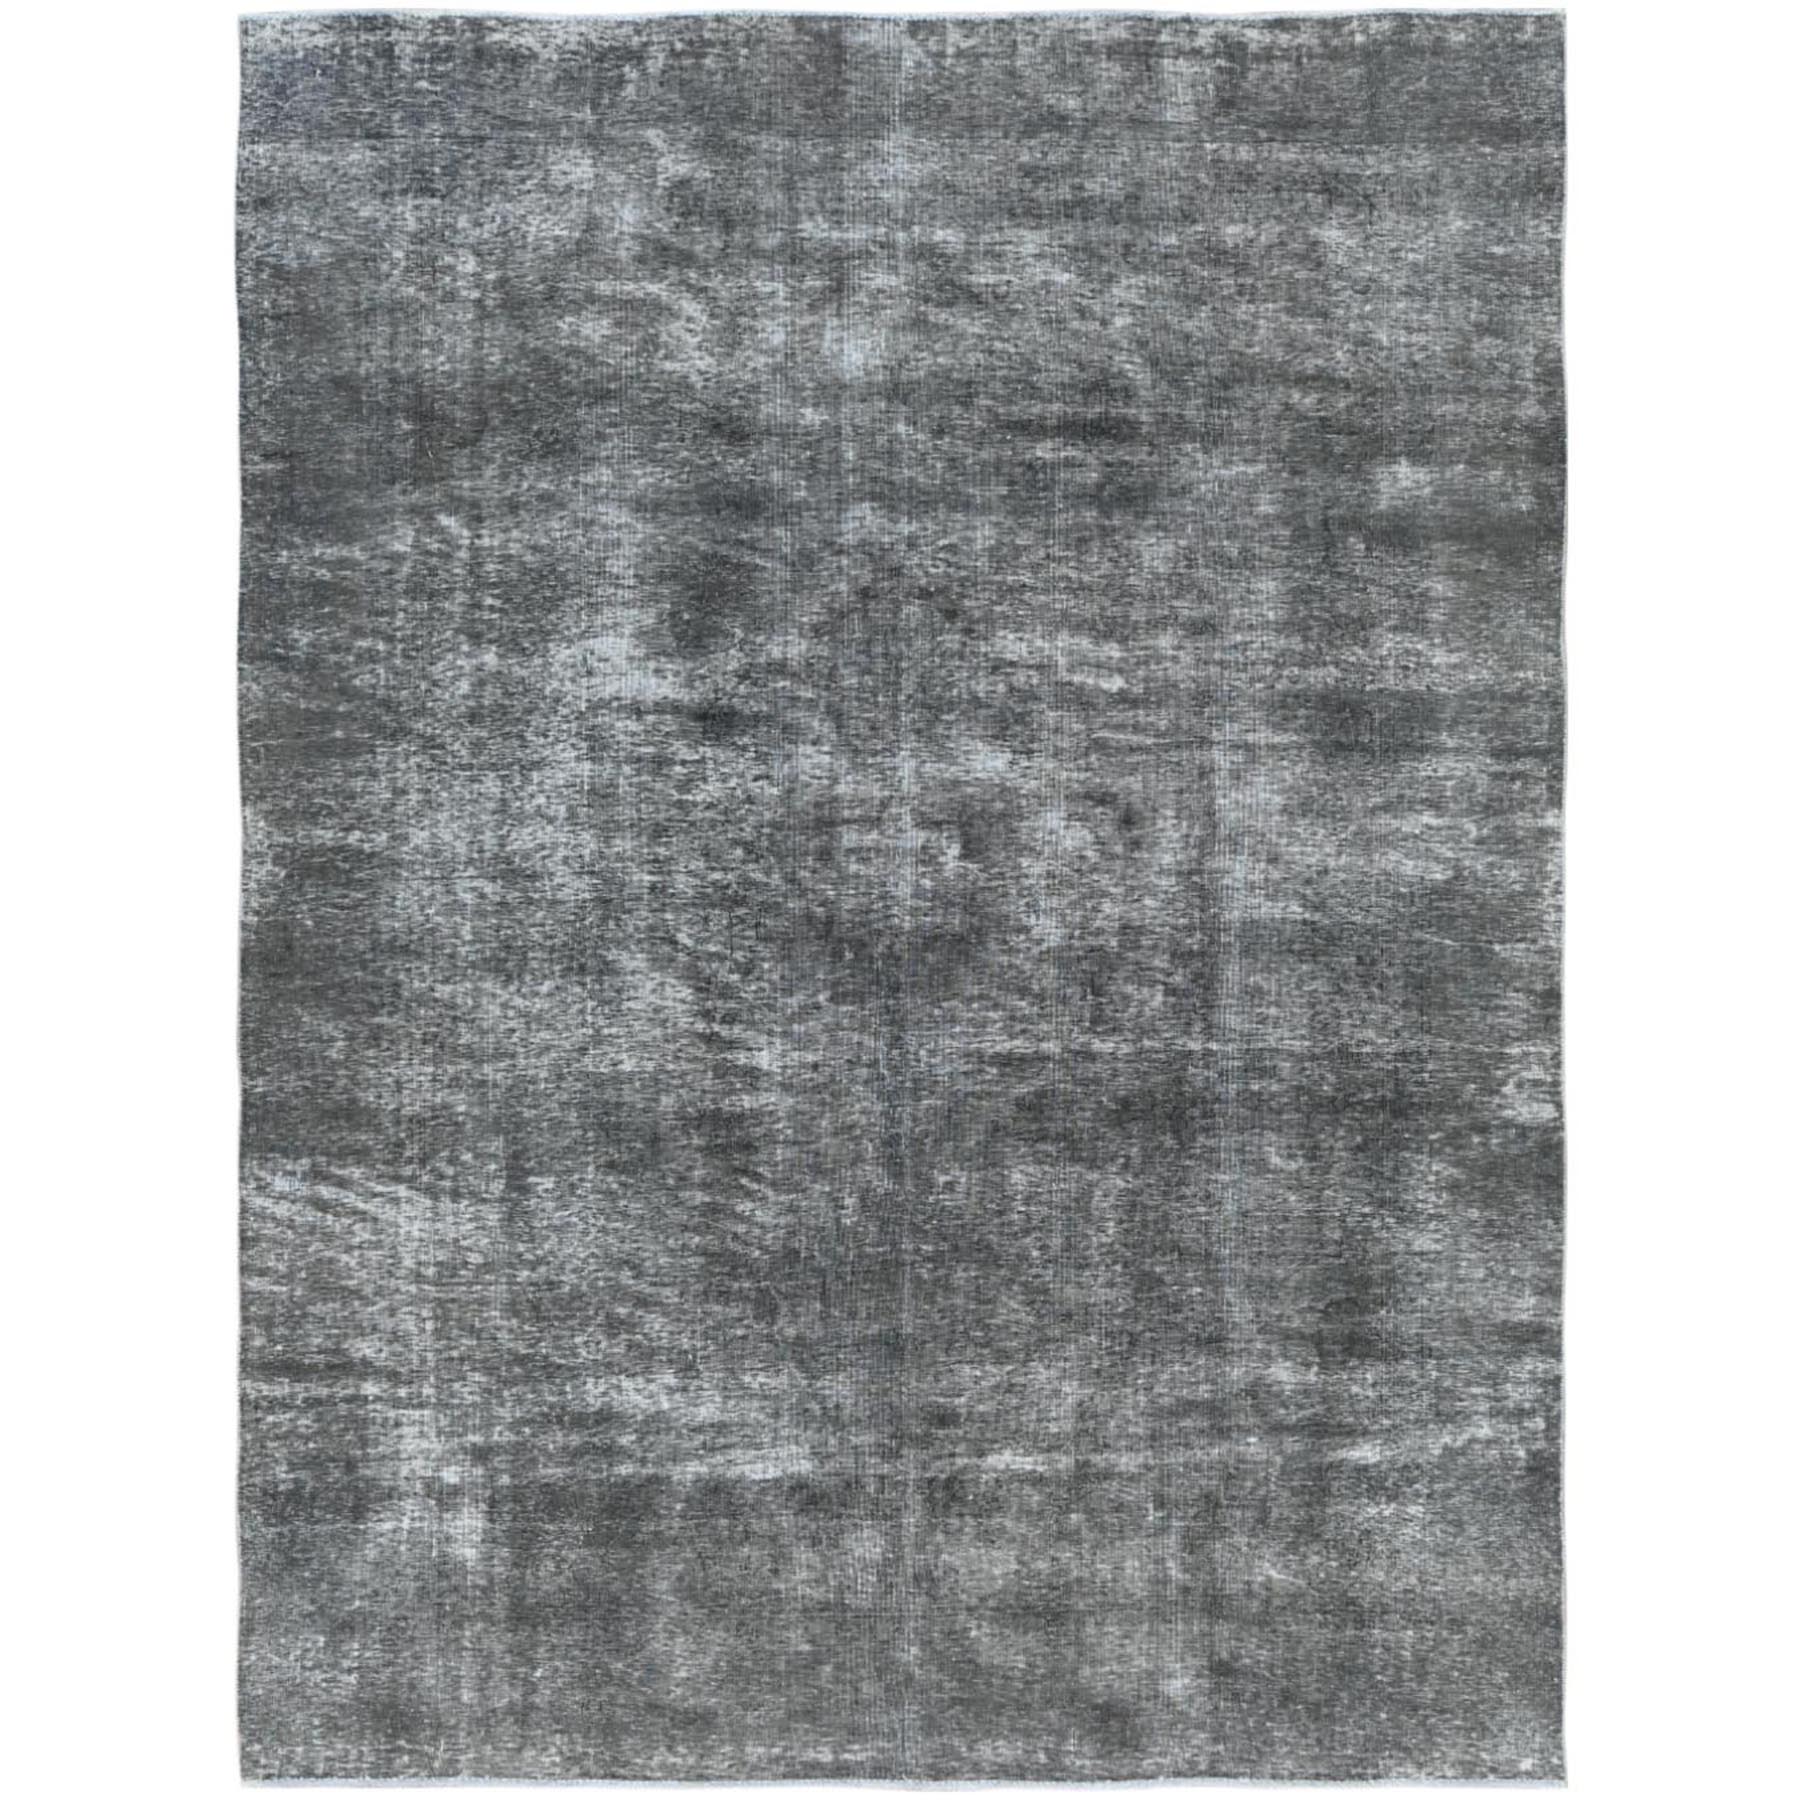  Wool Hand-Knotted Area Rug 8'5